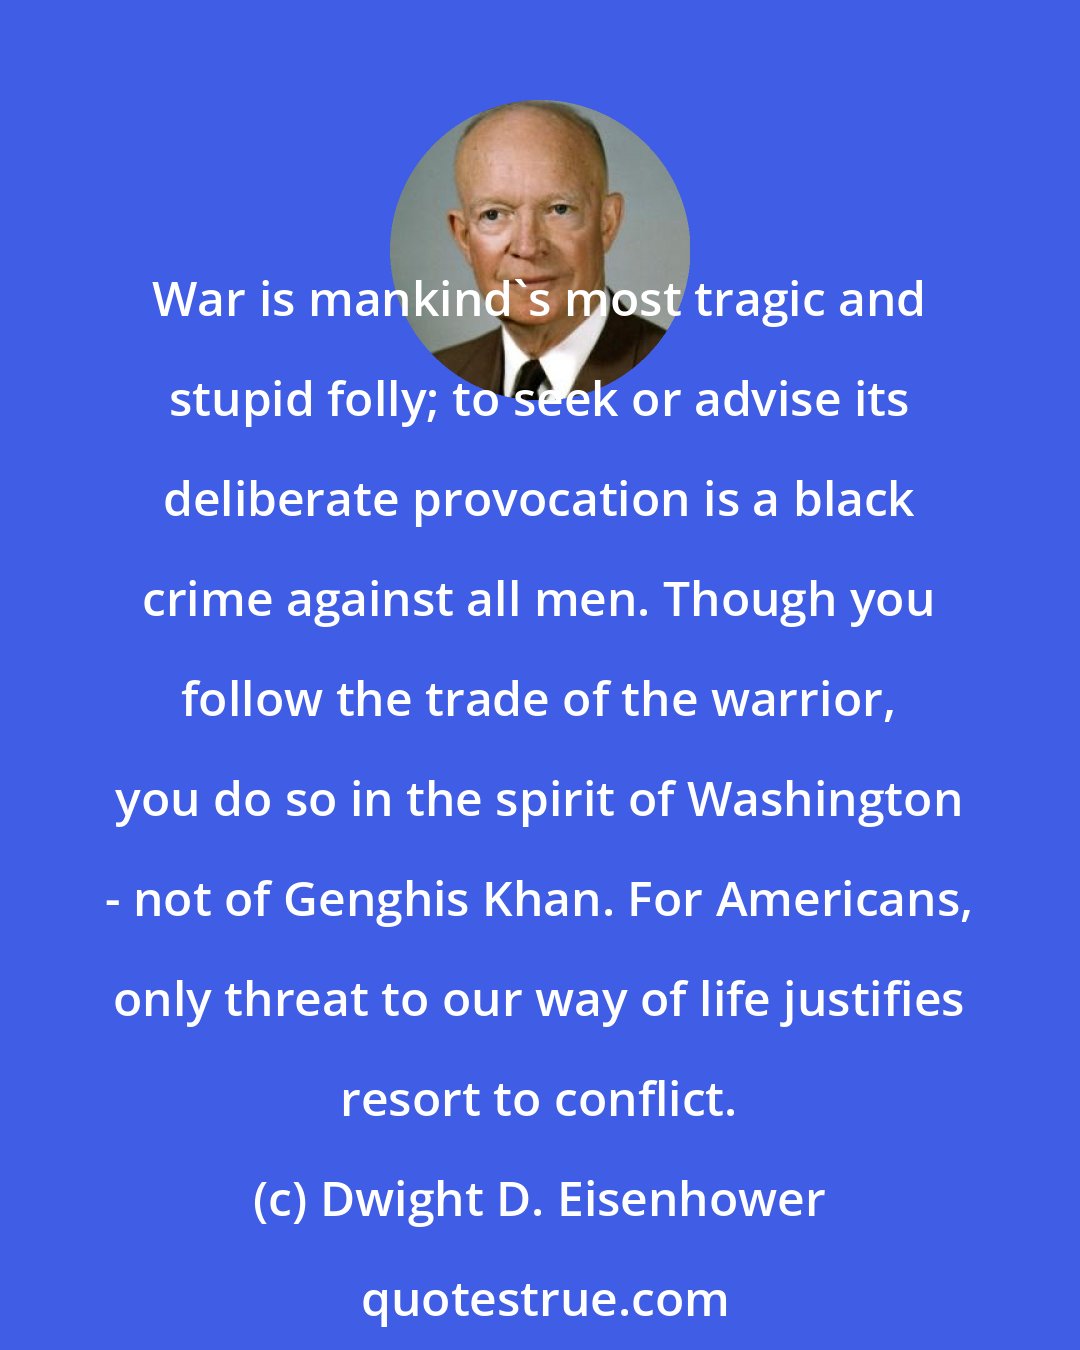 Dwight D. Eisenhower: War is mankind's most tragic and stupid folly; to seek or advise its deliberate provocation is a black crime against all men. Though you follow the trade of the warrior, you do so in the spirit of Washington - not of Genghis Khan. For Americans, only threat to our way of life justifies resort to conflict.